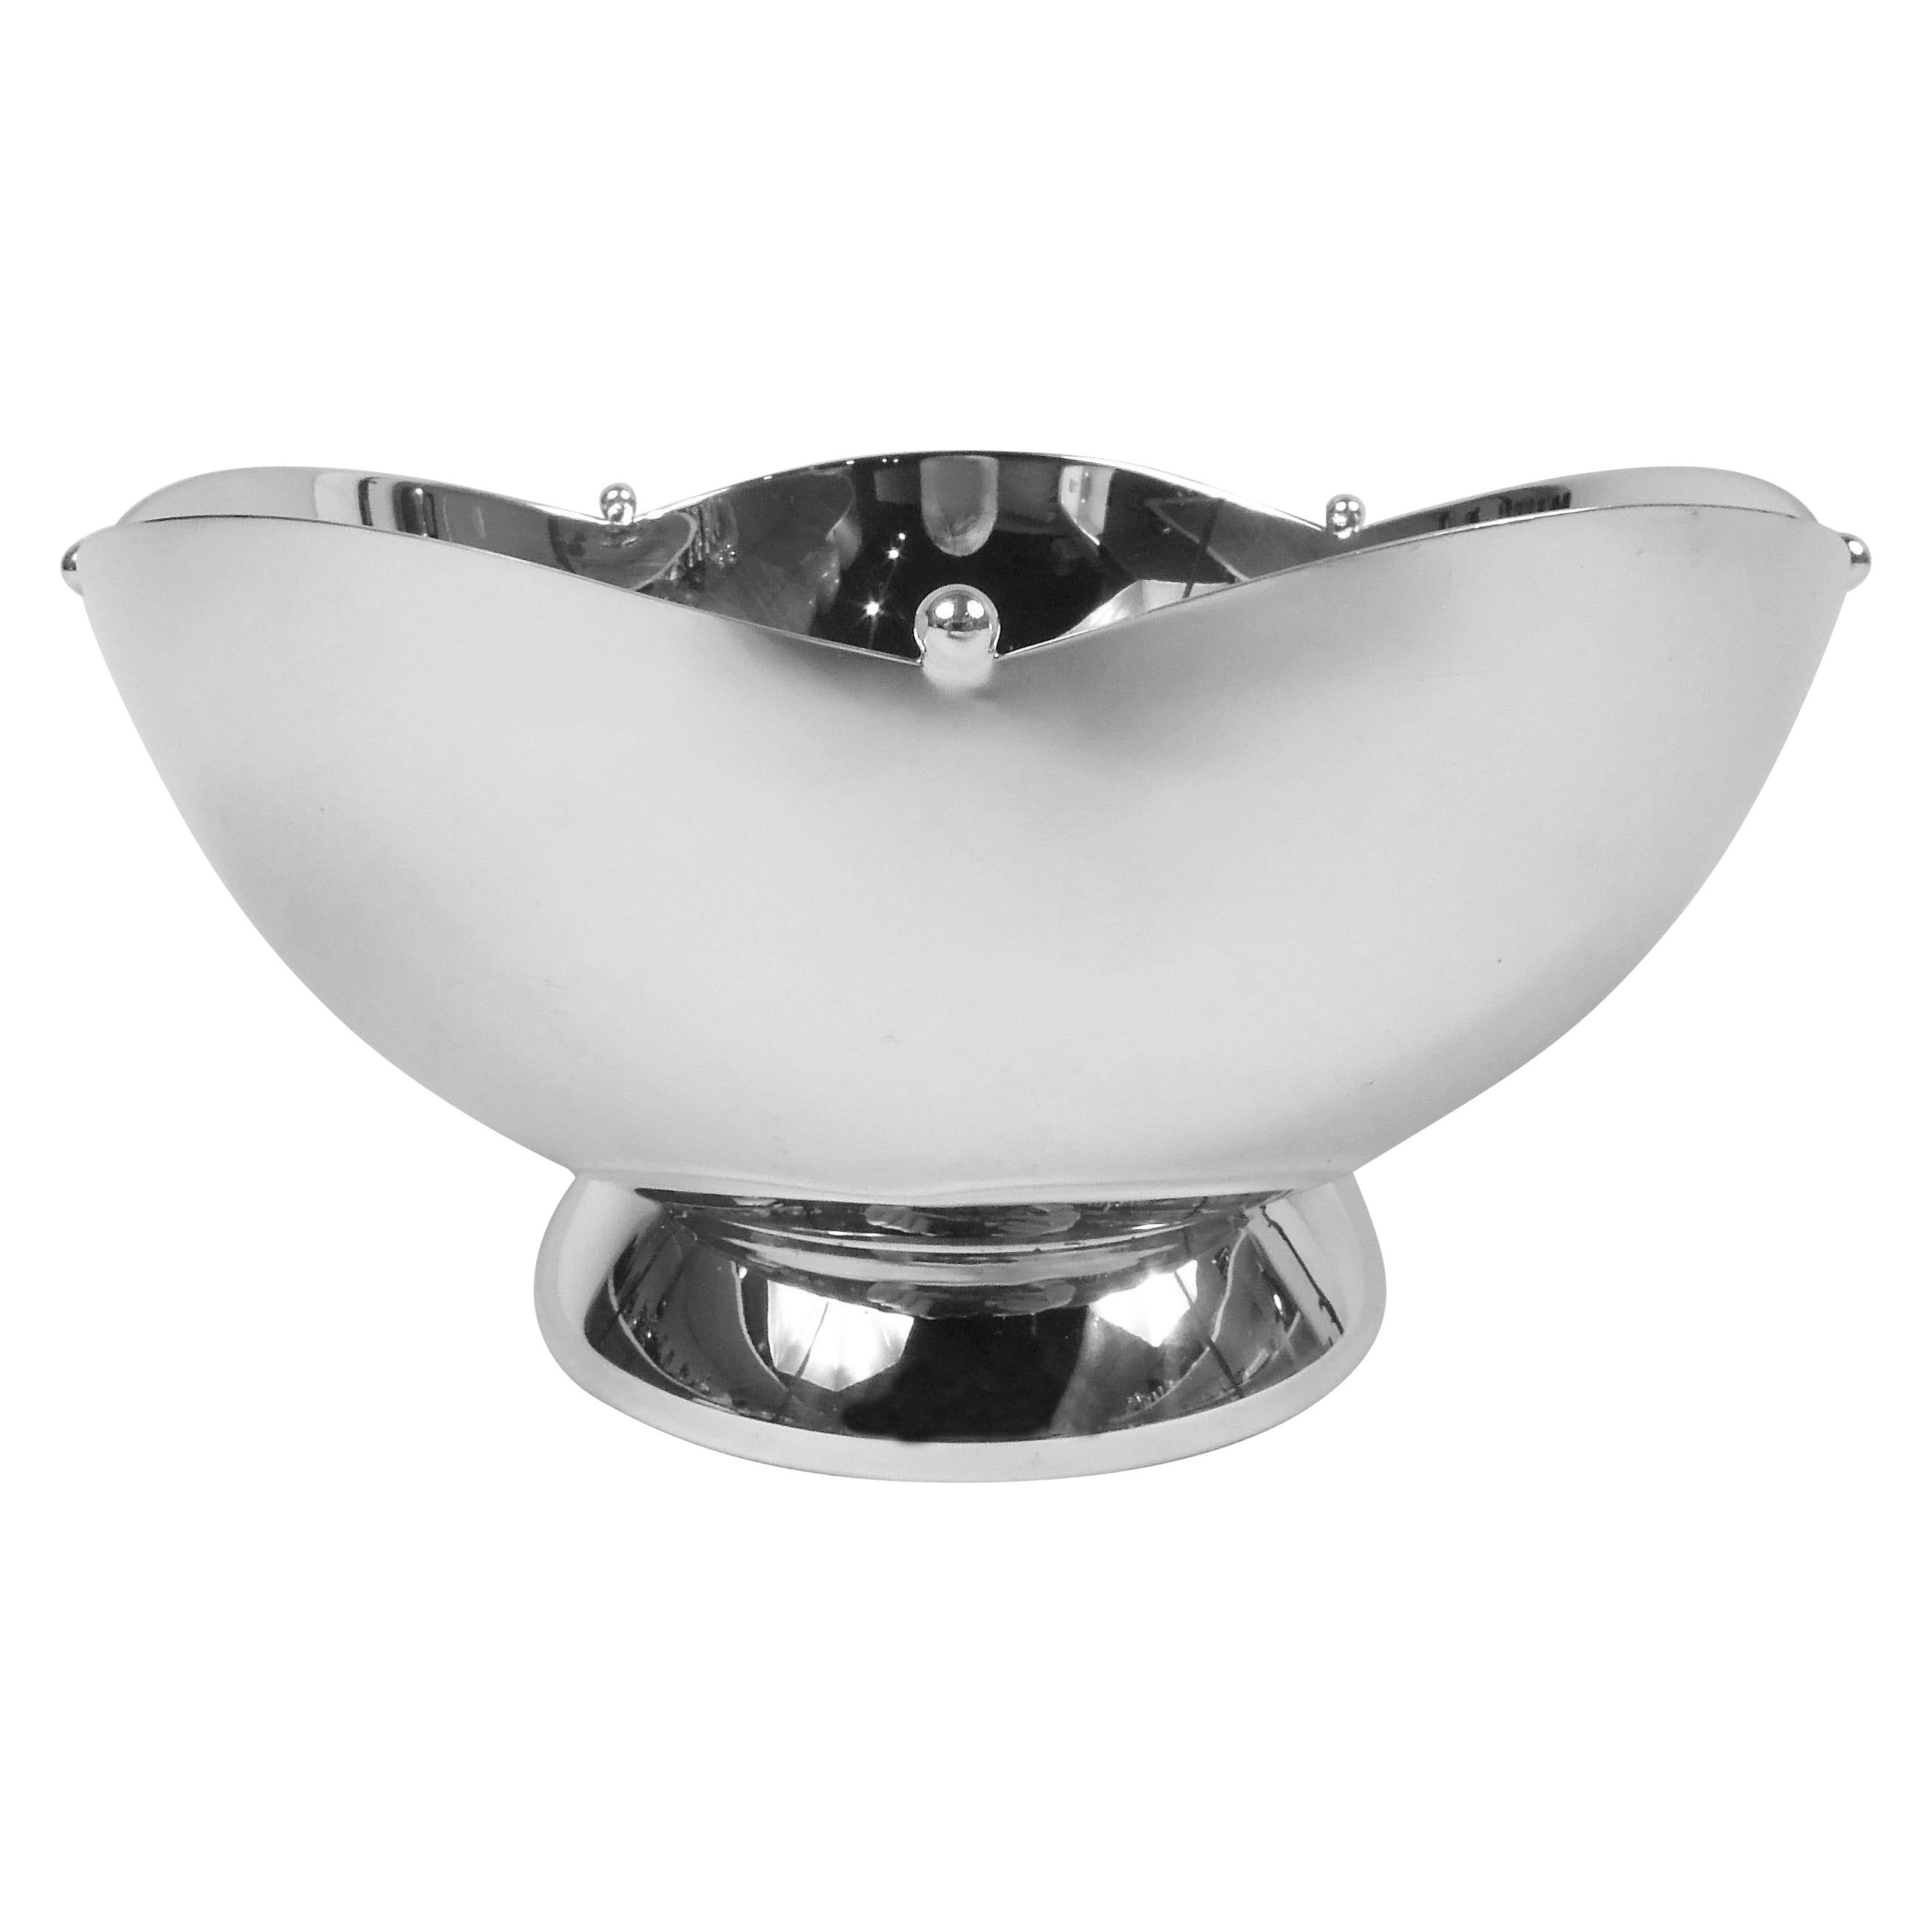 Cartier American Art Deco Sterling Silver Bowl For Sale